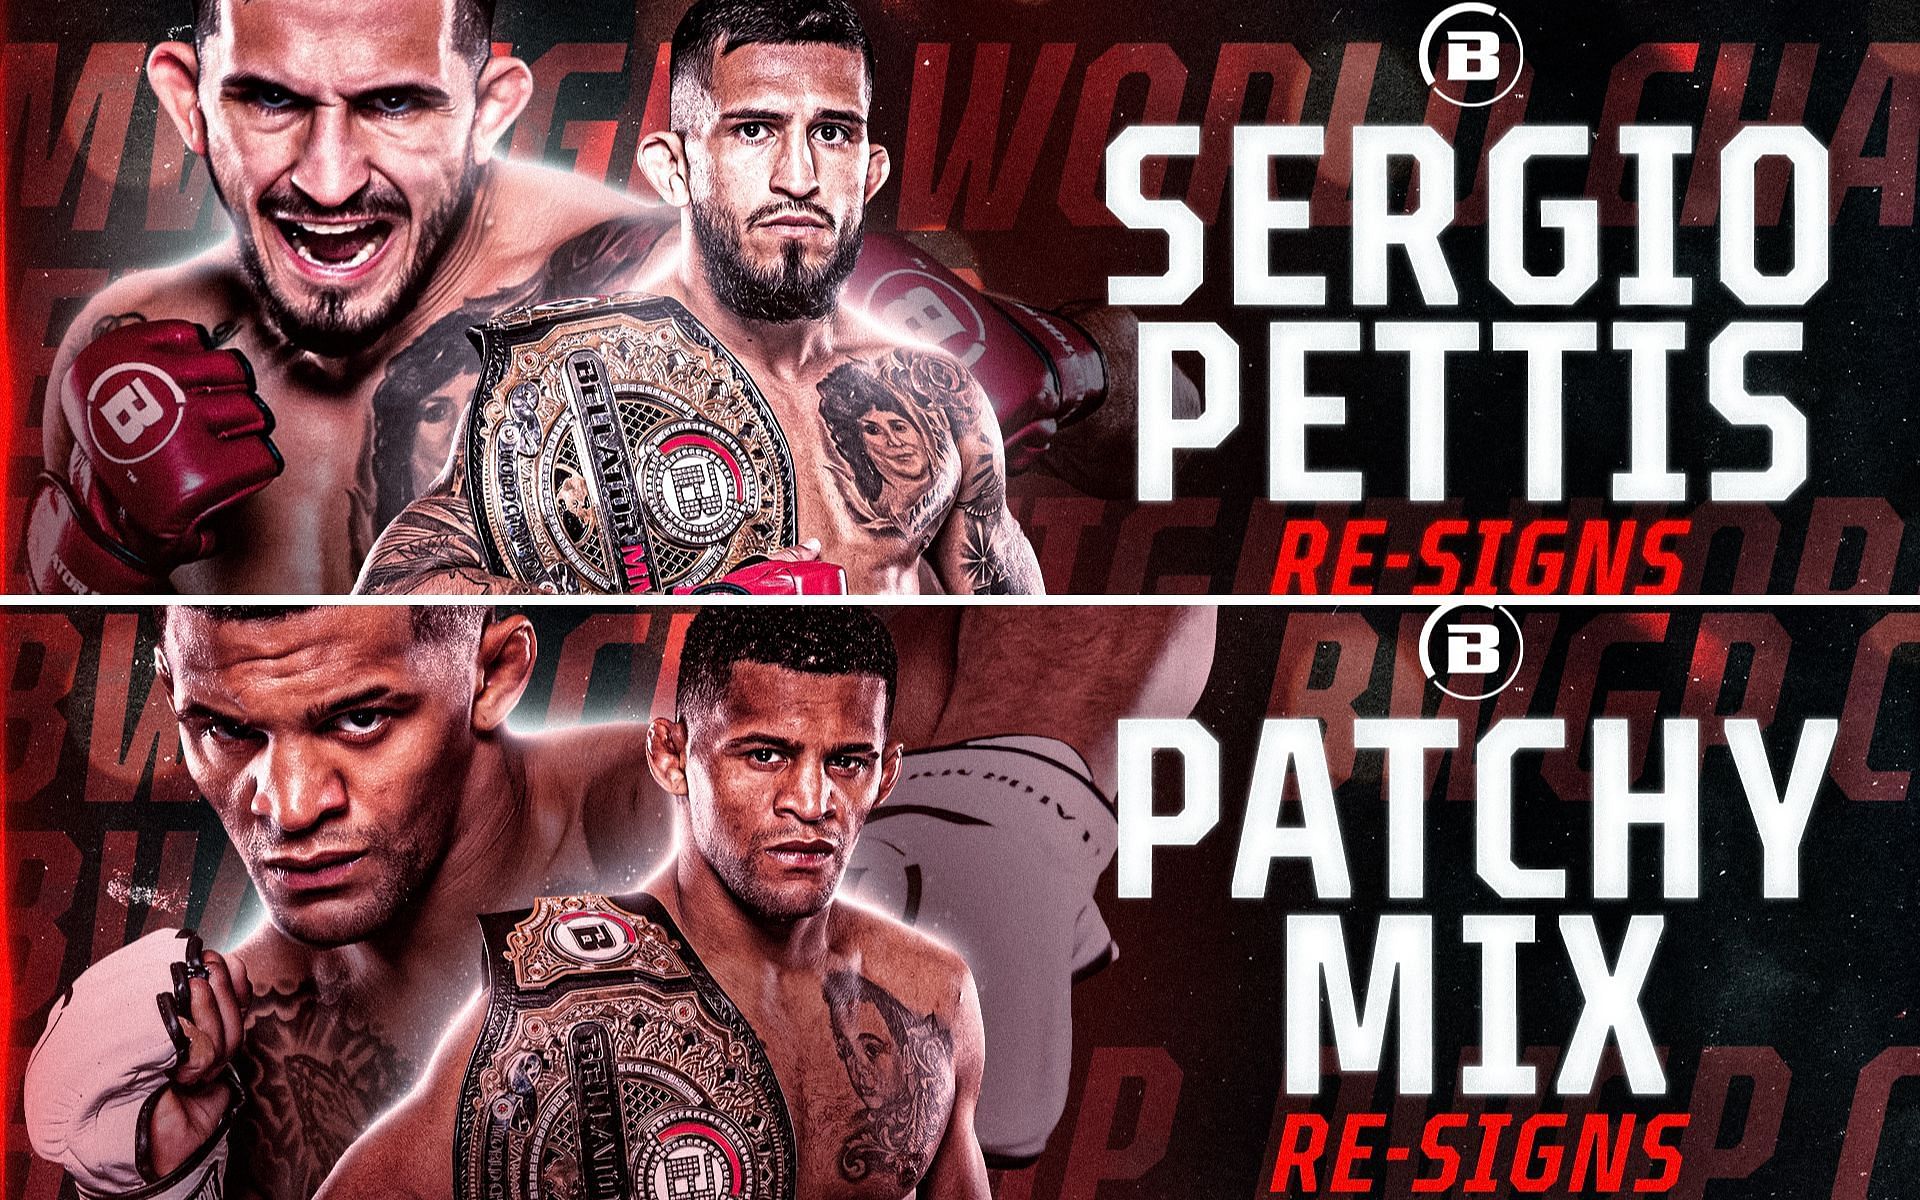 Sergio Pettis [Top], and Patchy Mix [Bottom] [Photo credit: @BellatorMMA - Twitter]